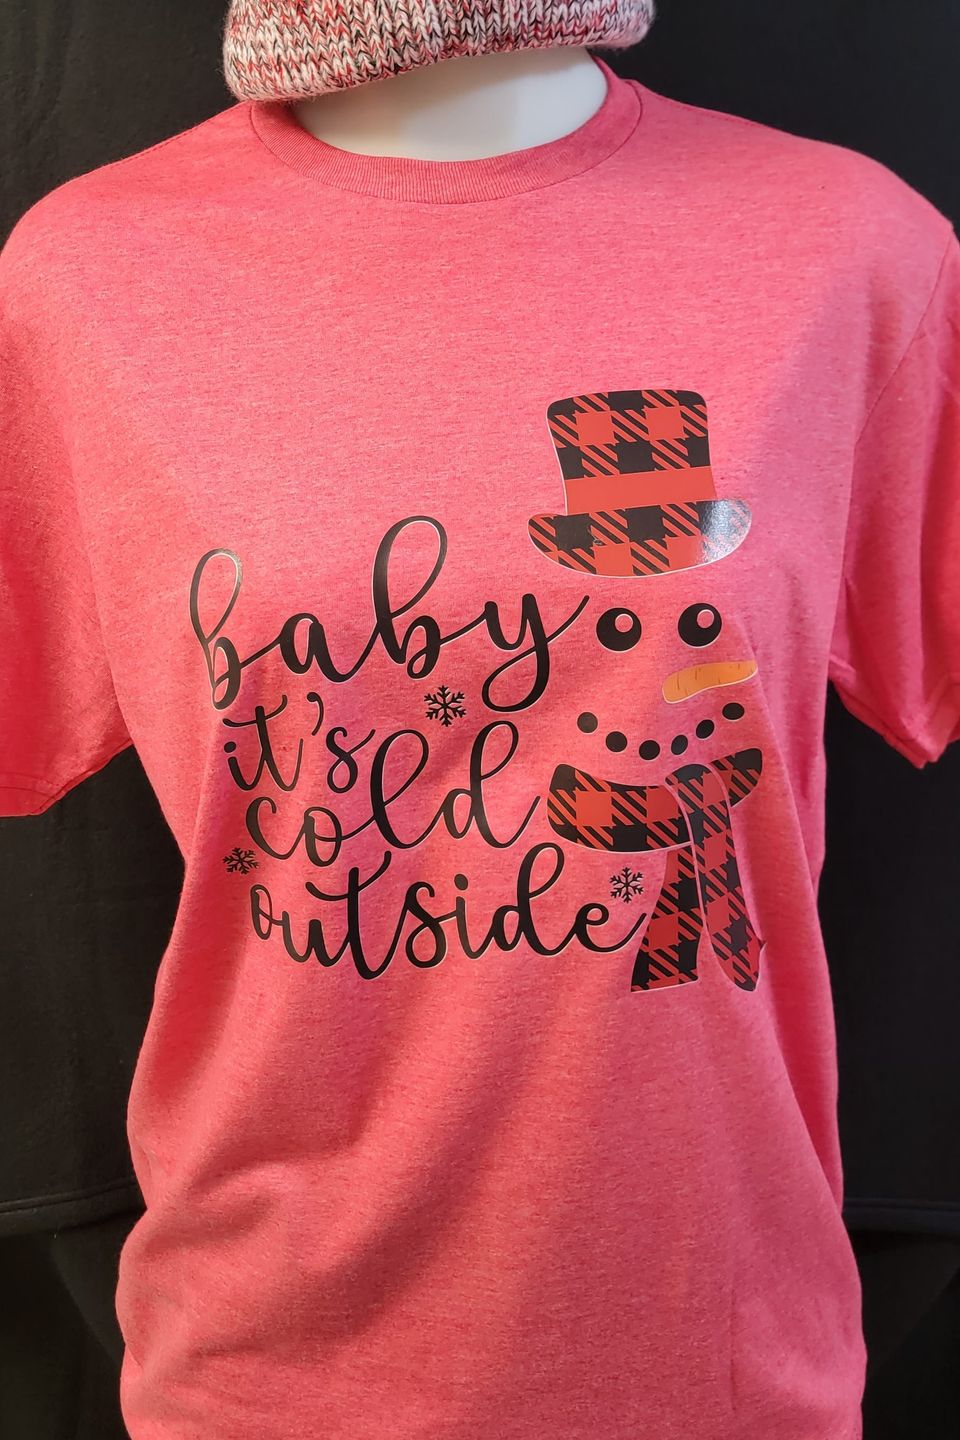 "Baby it's cold outside" t-shirt designed by SaRi's Creations using Direct to Film (DTF) technique. 